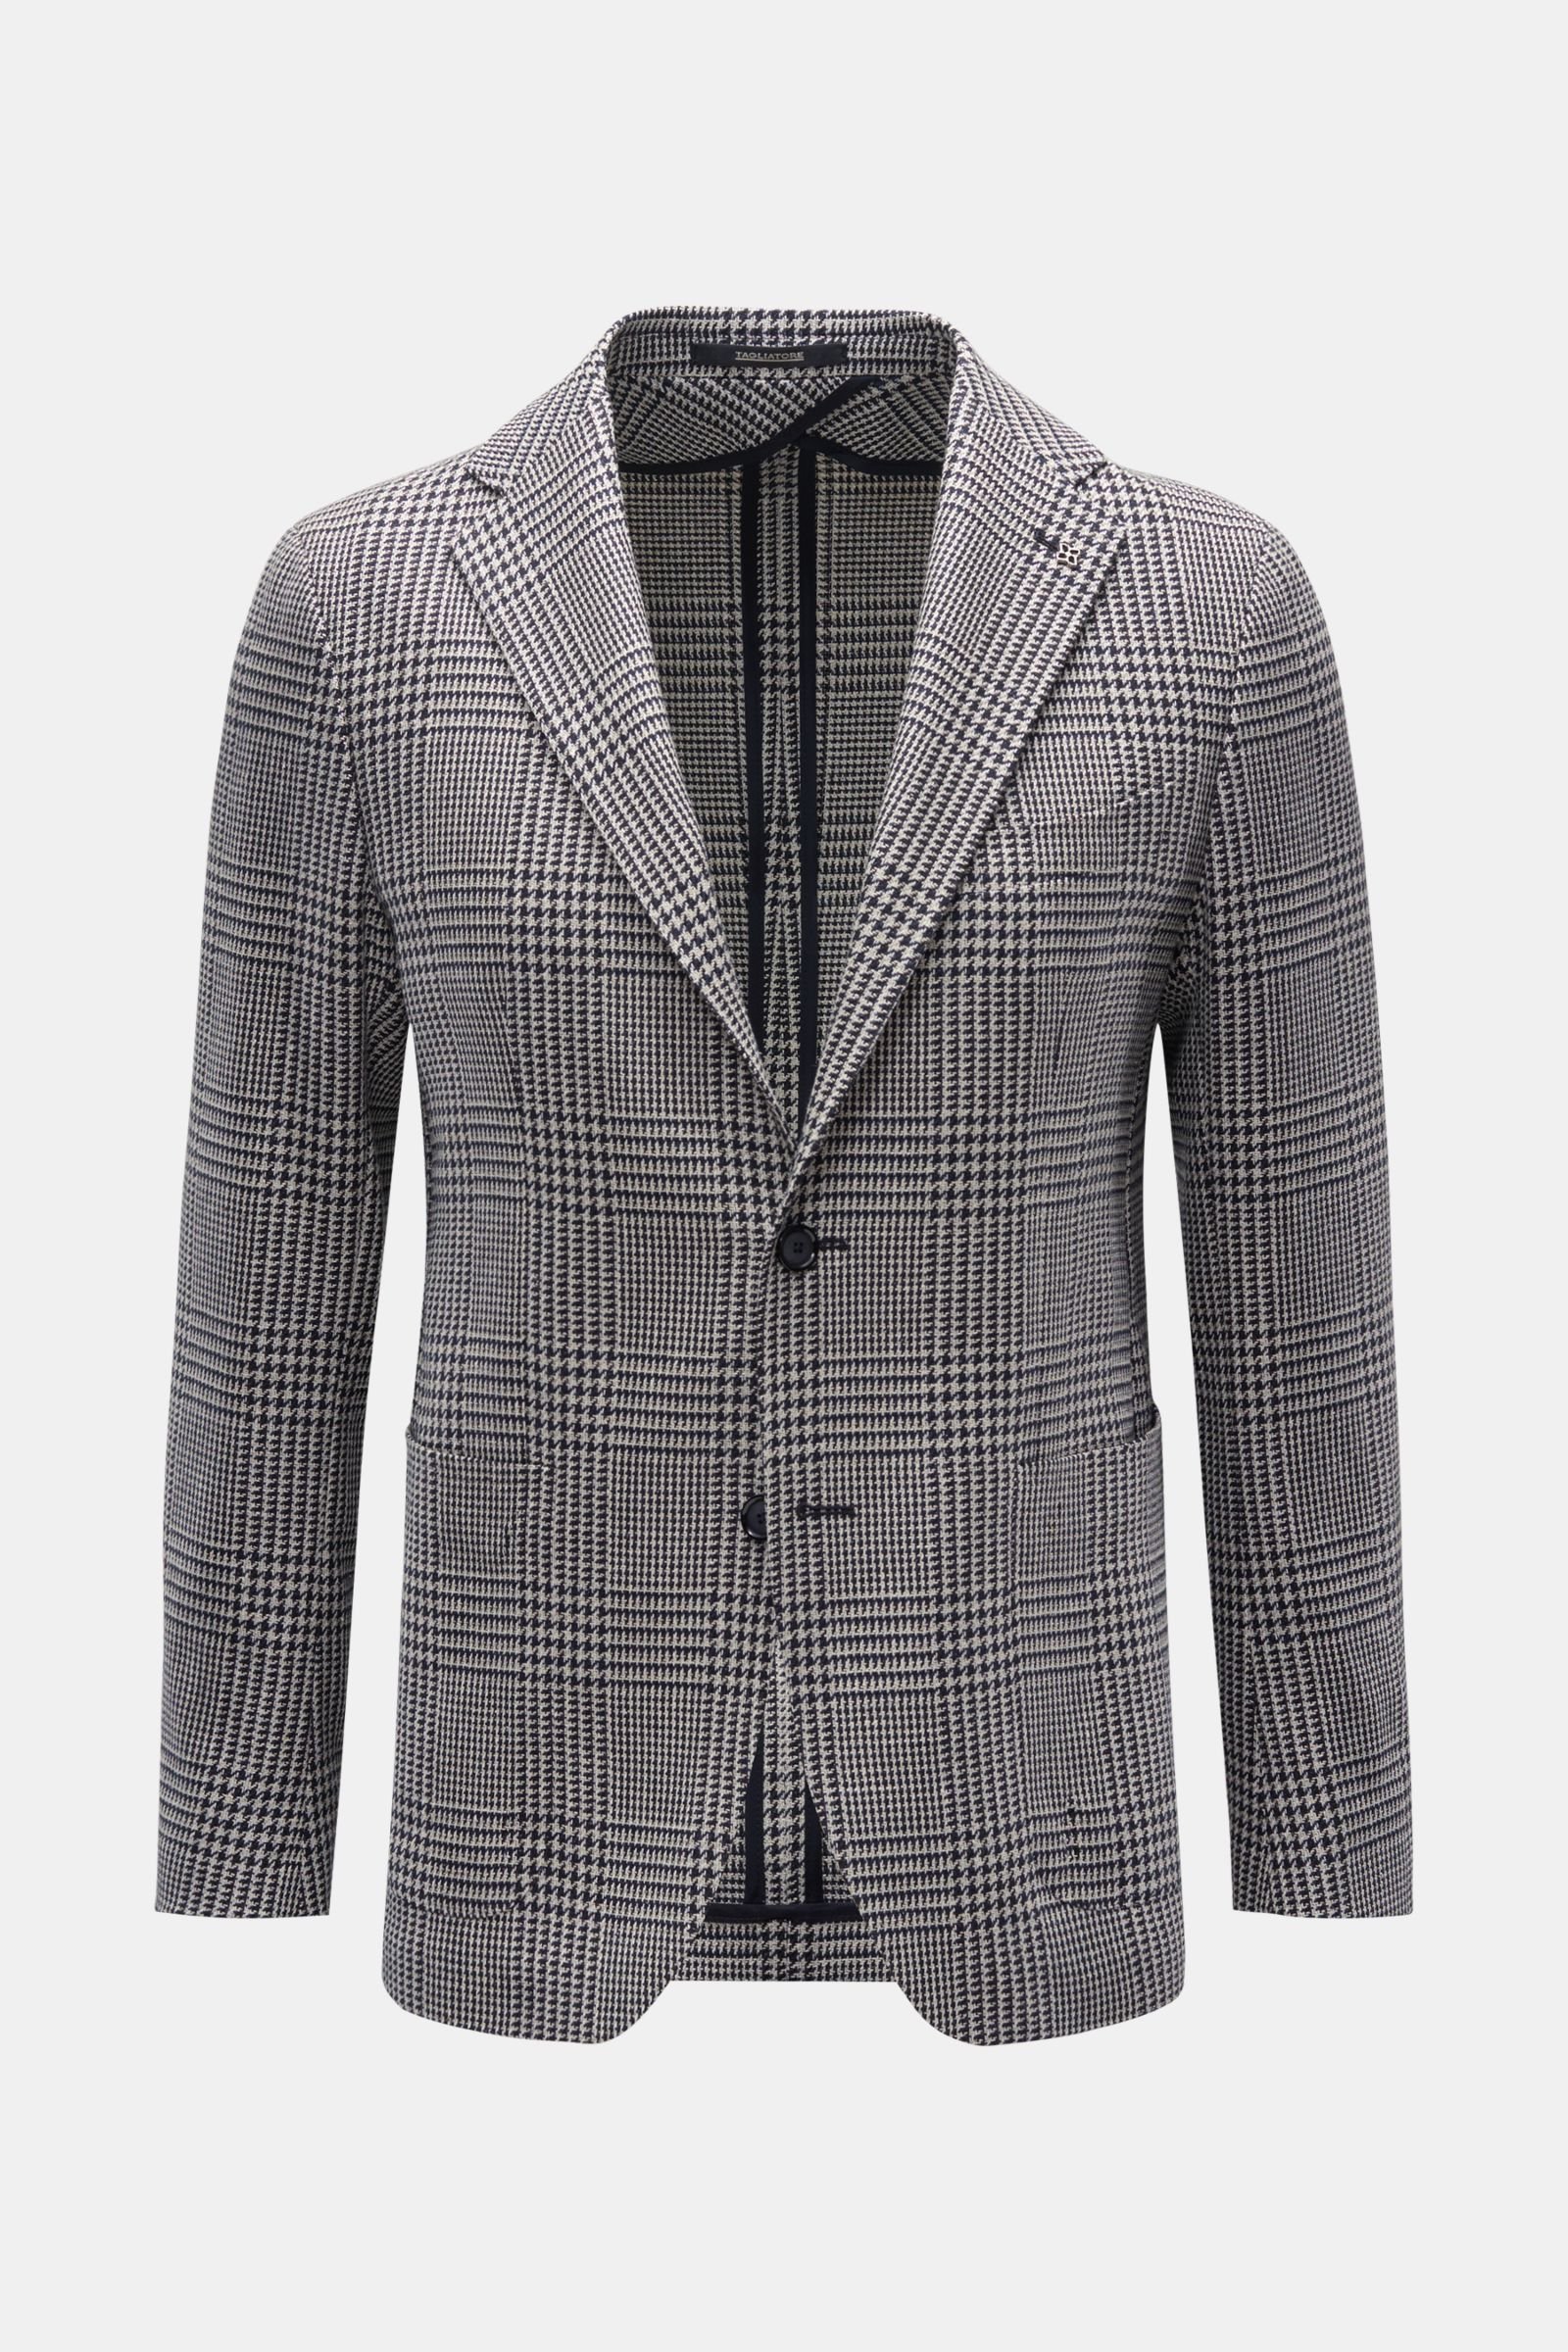 Smart-casual jacket navy/beige checked